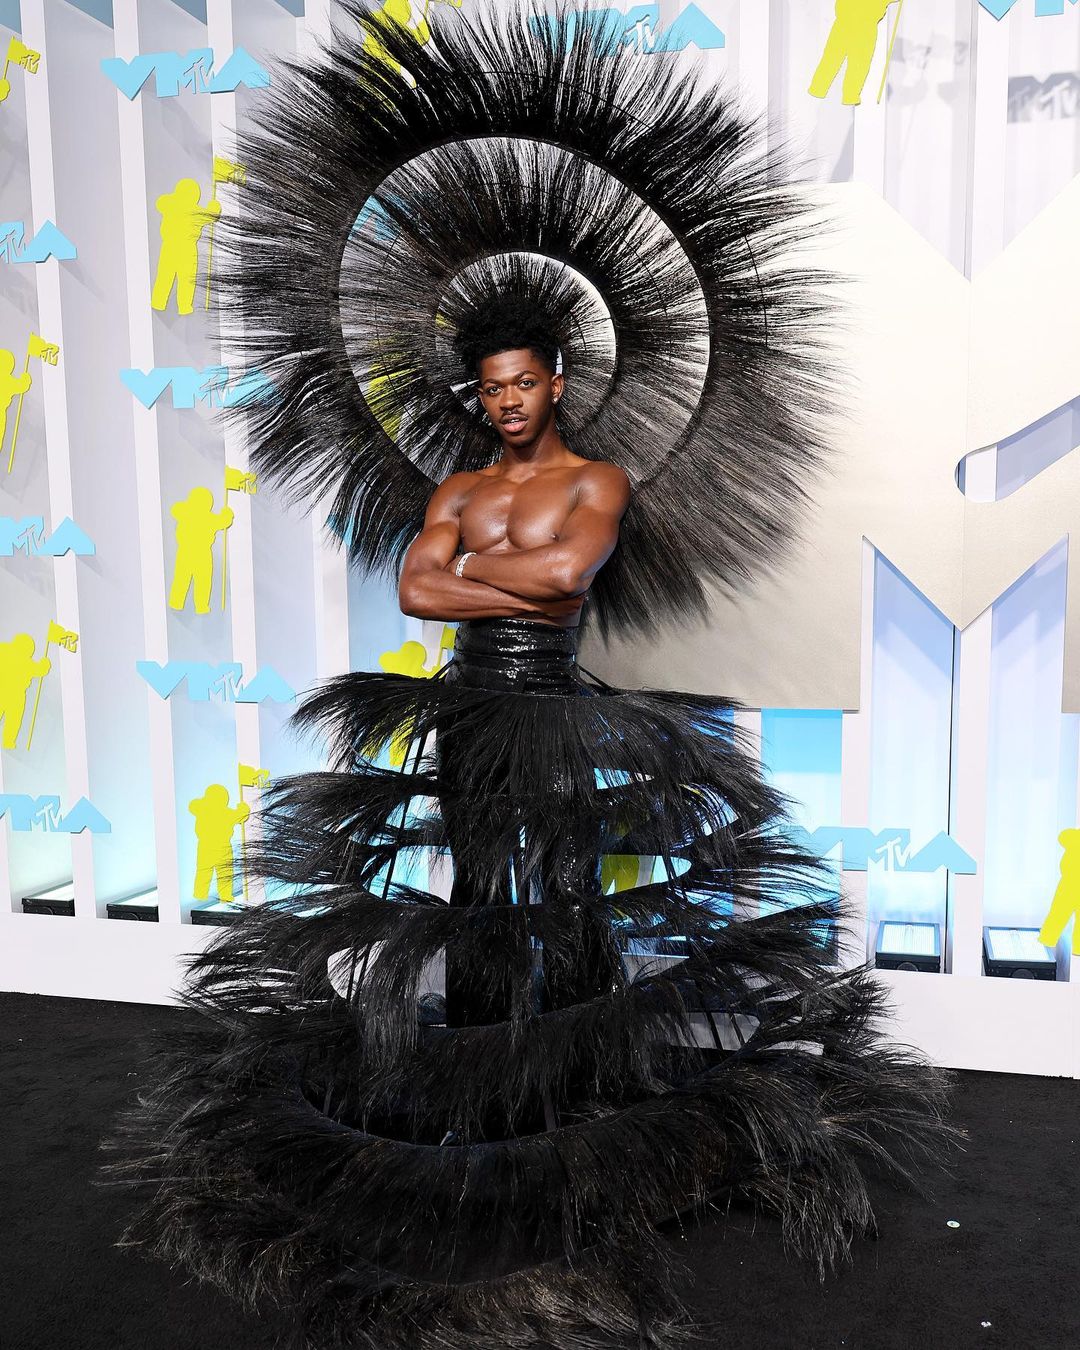 Best Dressed Celebrities at the 2019 MTV VMAs: Taylor Swift, Lizzo